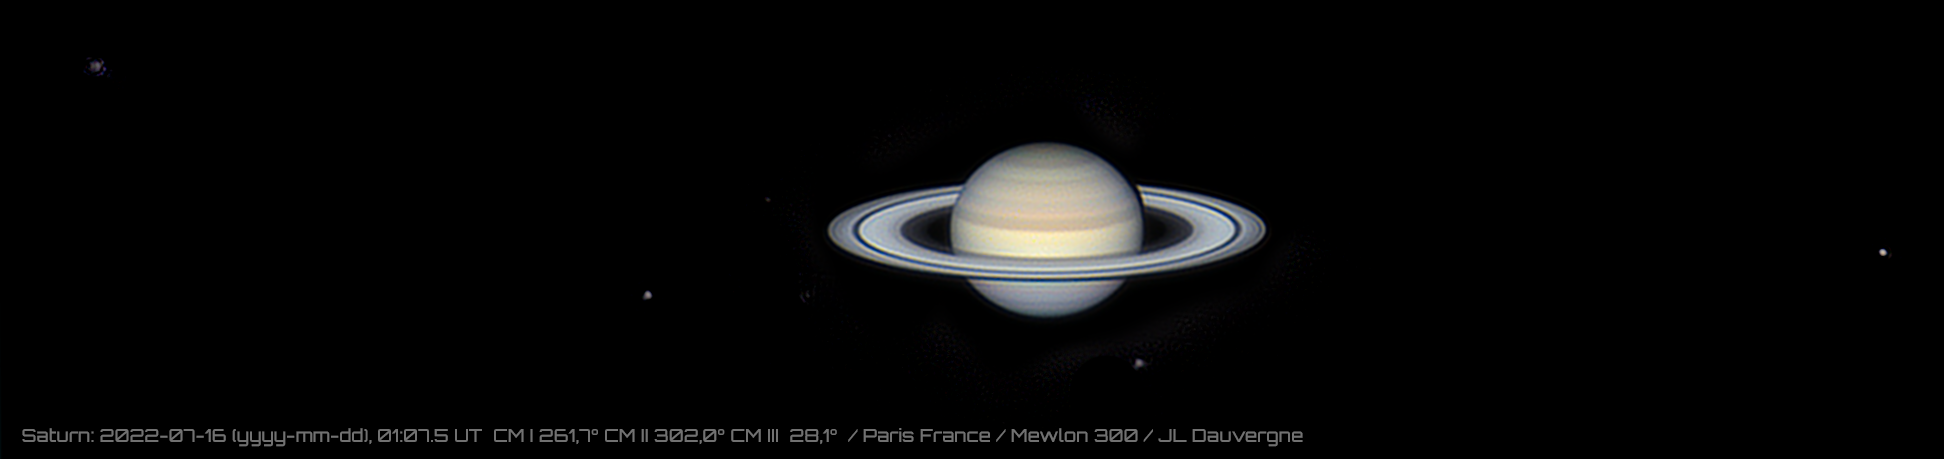 2022-07-16-0107_5-L-Saturn_QHY5III462C_lapl6_ap92.png.94dc4591017b5606abaf71c4ead6d432.png